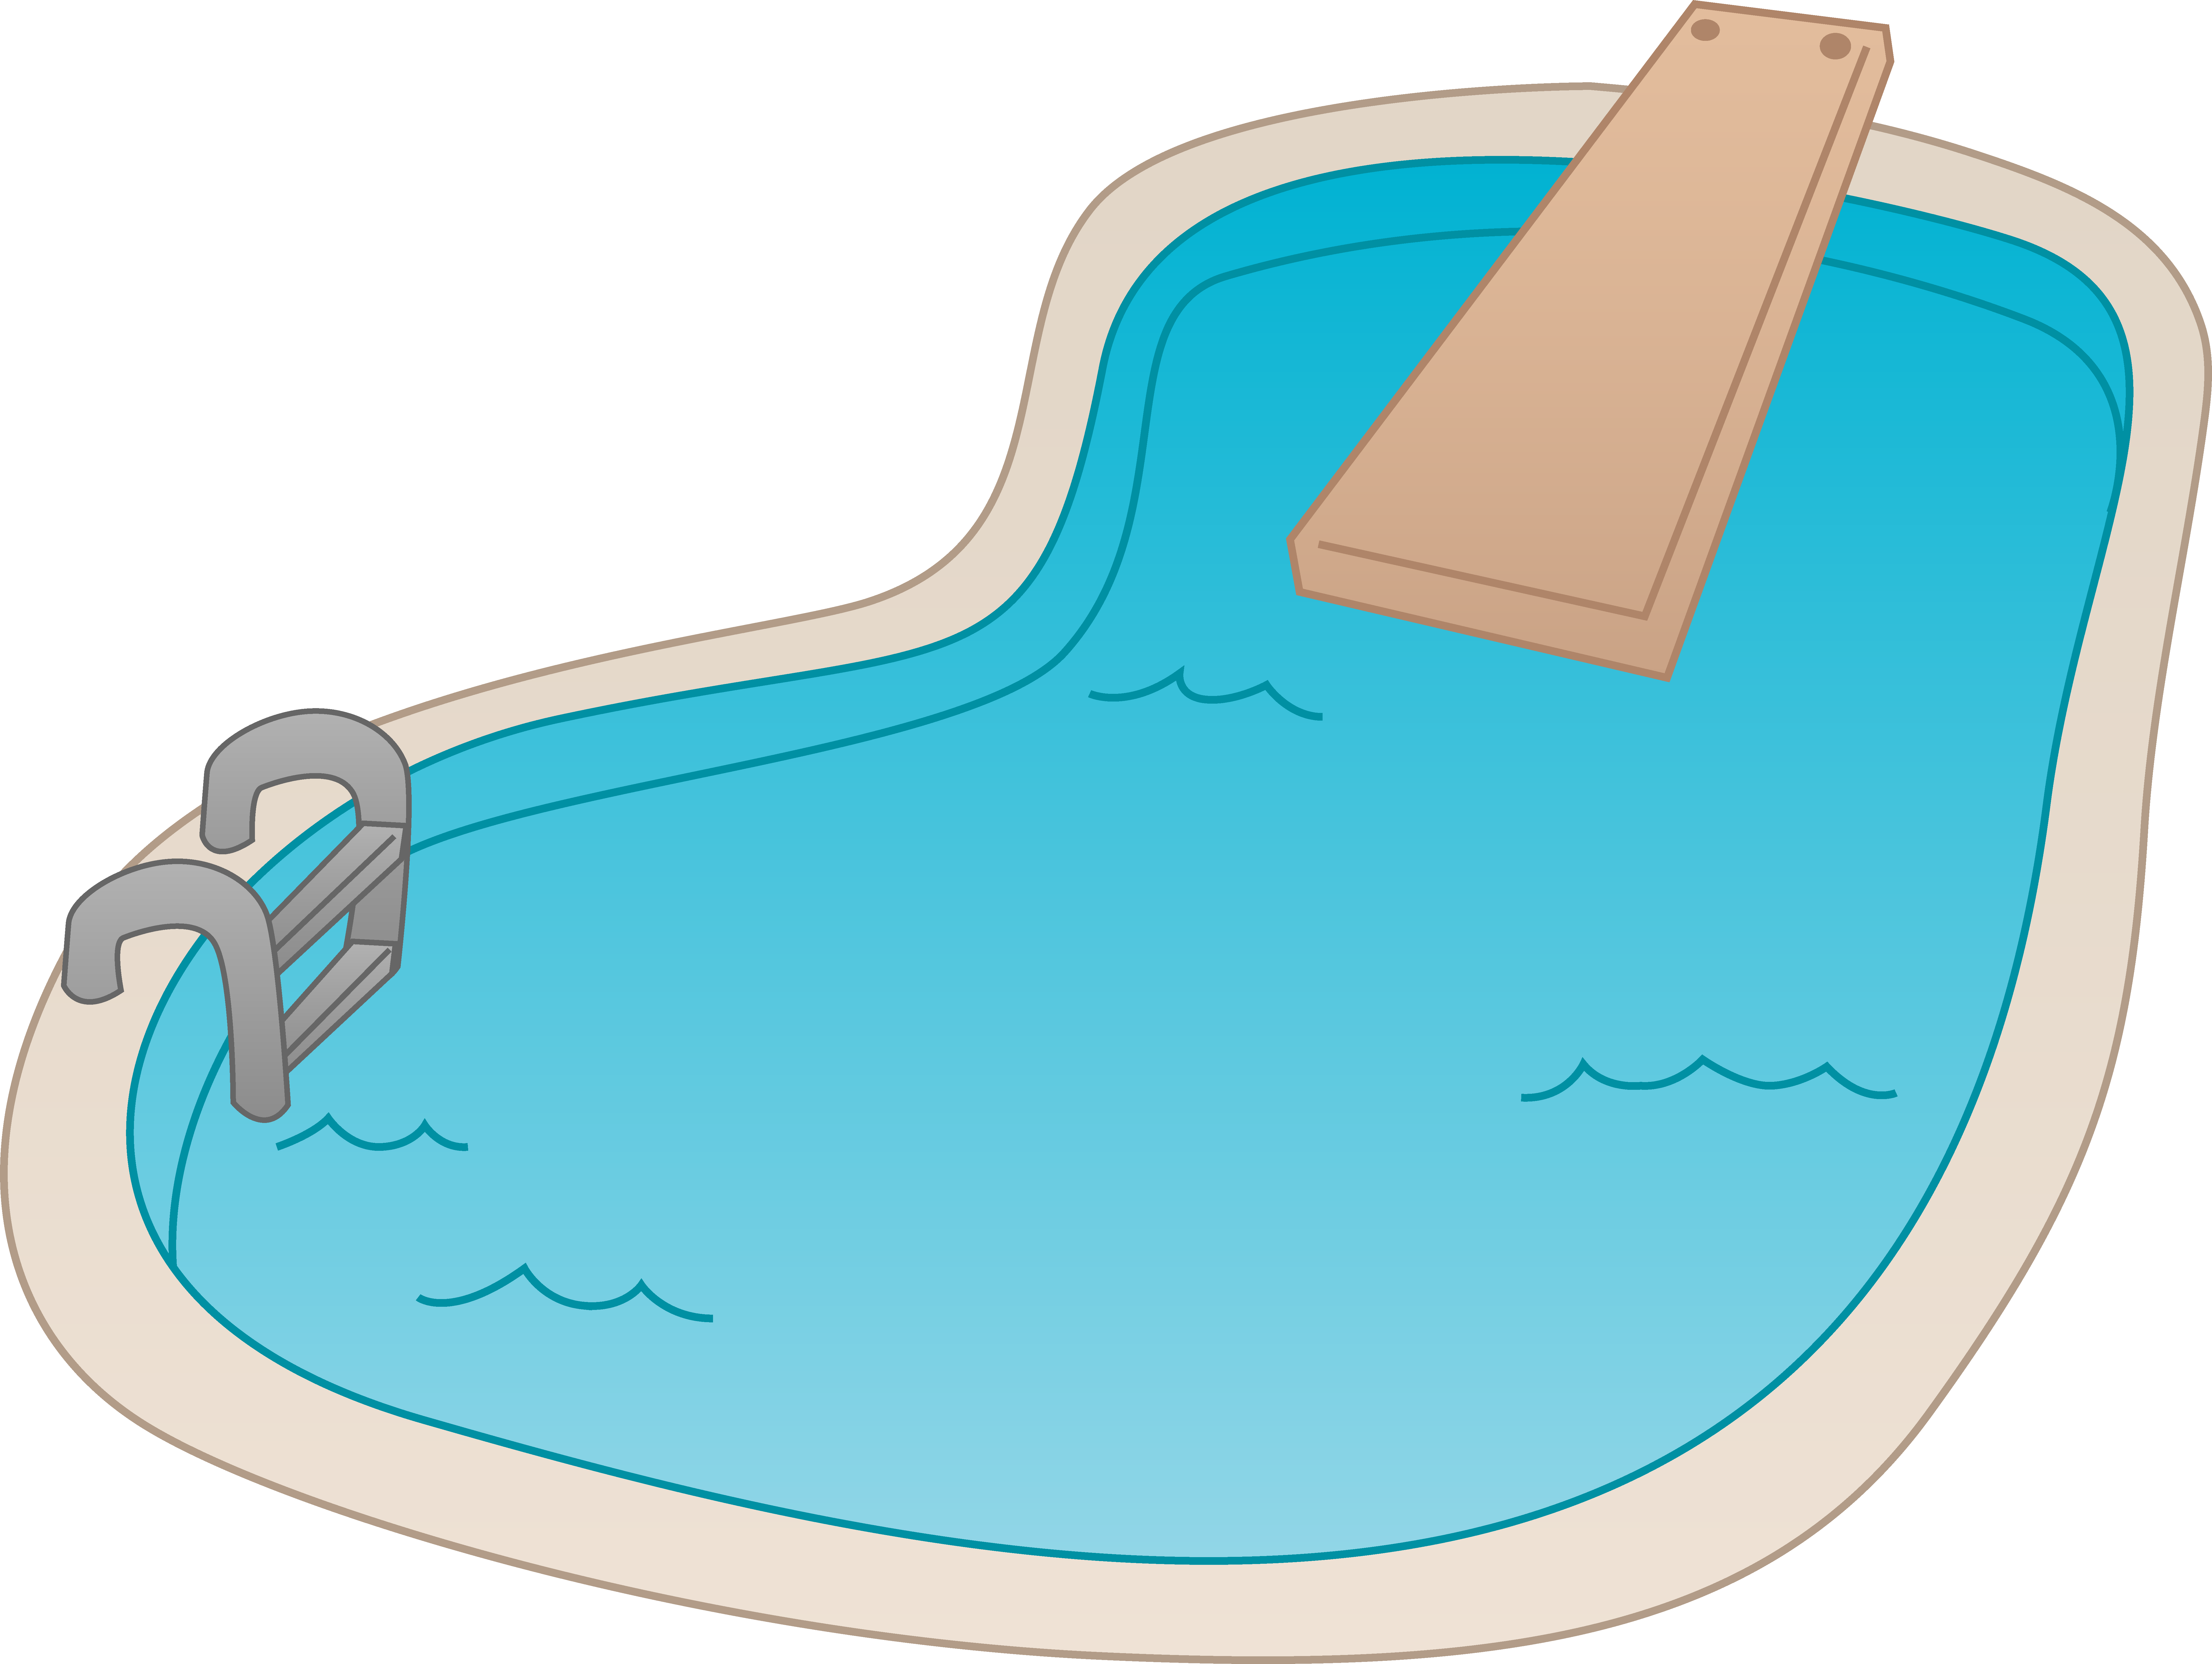 Swimming Pool Cartoon Images | Free Download Clip Art | Free Clip ...